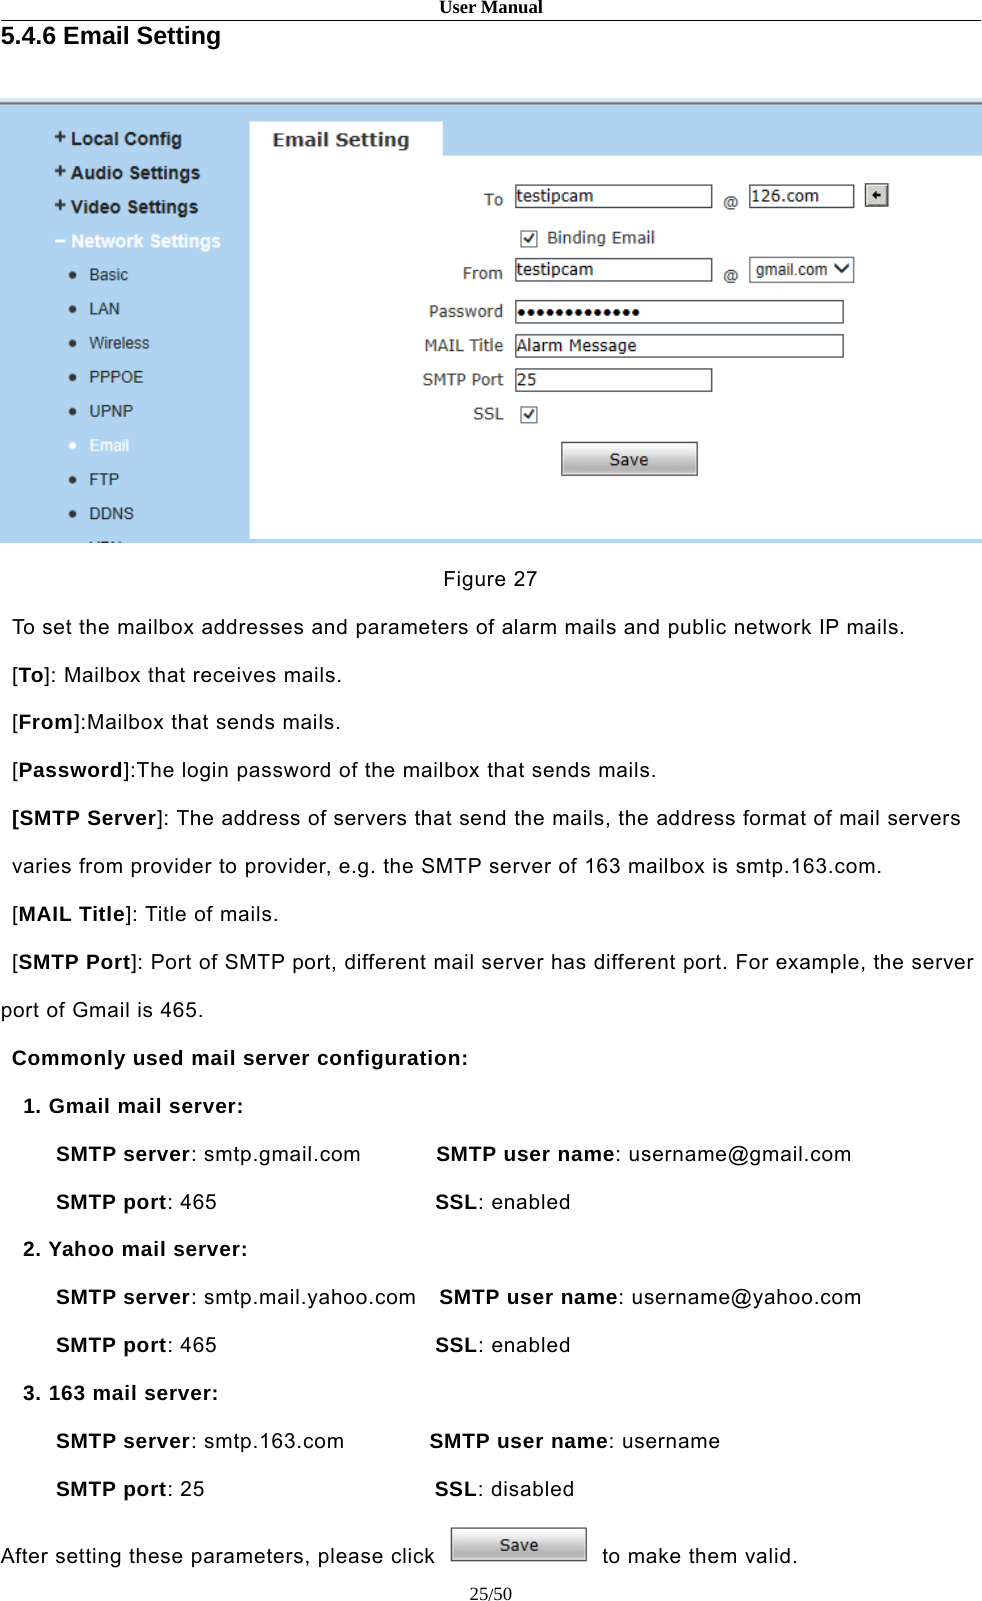 User Manual25/505.4.6 Email SettingFigure 27To set the mailbox addresses and parameters of alarm mails and public network IP mails.[To]: Mailbox that receives mails.[From]:Mailbox that sends mails.[Password]:The login password of the mailbox that sends mails.[SMTP Server]: The address of servers that send the mails, the address format of mail serversvaries from provider to provider, e.g. the SMTP server of 163 mailbox is smtp.163.com.[MAIL Title]: Title of mails.[SMTP Port]: Port of SMTP port, different mail server has different port. For example, the serverport of Gmail is 465.Commonly used mail server configuration:1. Gmail mail server:SMTP server: smtp.gmail.com SMTP user name: username@gmail.comSMTP port: 465 SSL: enabled2. Yahoo mail server:SMTP server: smtp.mail.yahoo.com SMTP user name: username@yahoo.comSMTP port: 465 SSL: enabled3. 163 mail server:SMTP server: smtp.163.com SMTP user name:usernameSMTP port:25 SSL: disabledAfter setting these parameters, please click to make them valid.